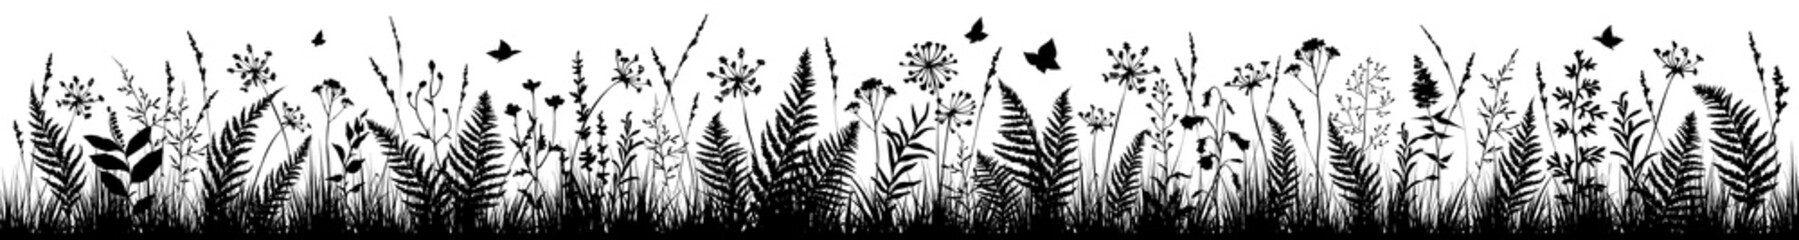 Background with black silhouettes of meadow wild herbs. Wildflowers. Floral background.